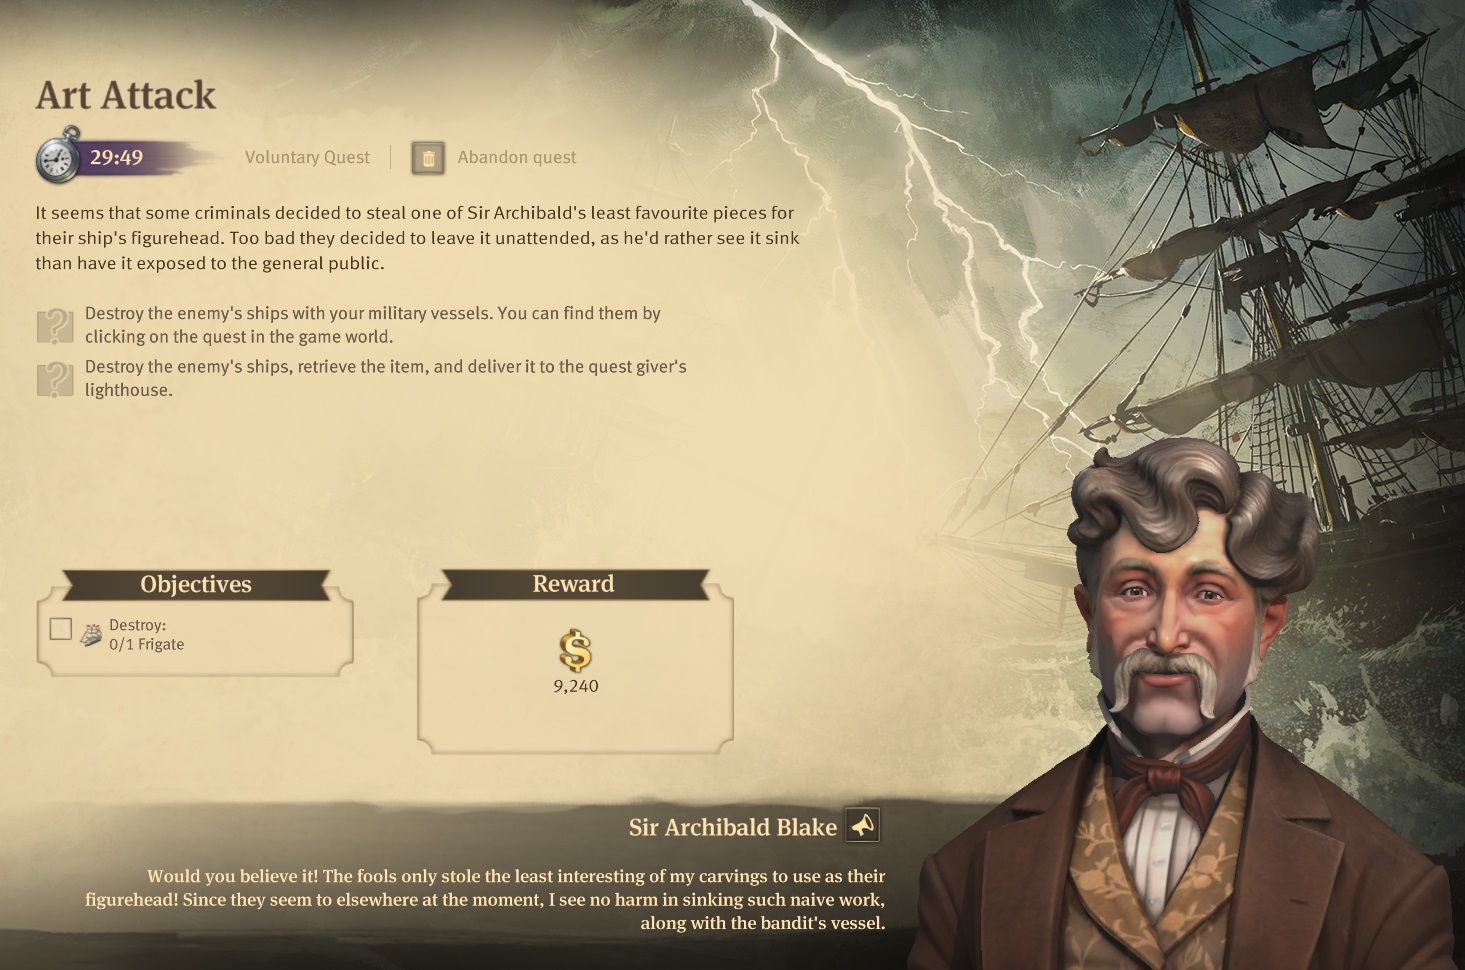 Art Attack quest - The commission for the Art Attack quest by Sir Archibald Blake in Anno 1800